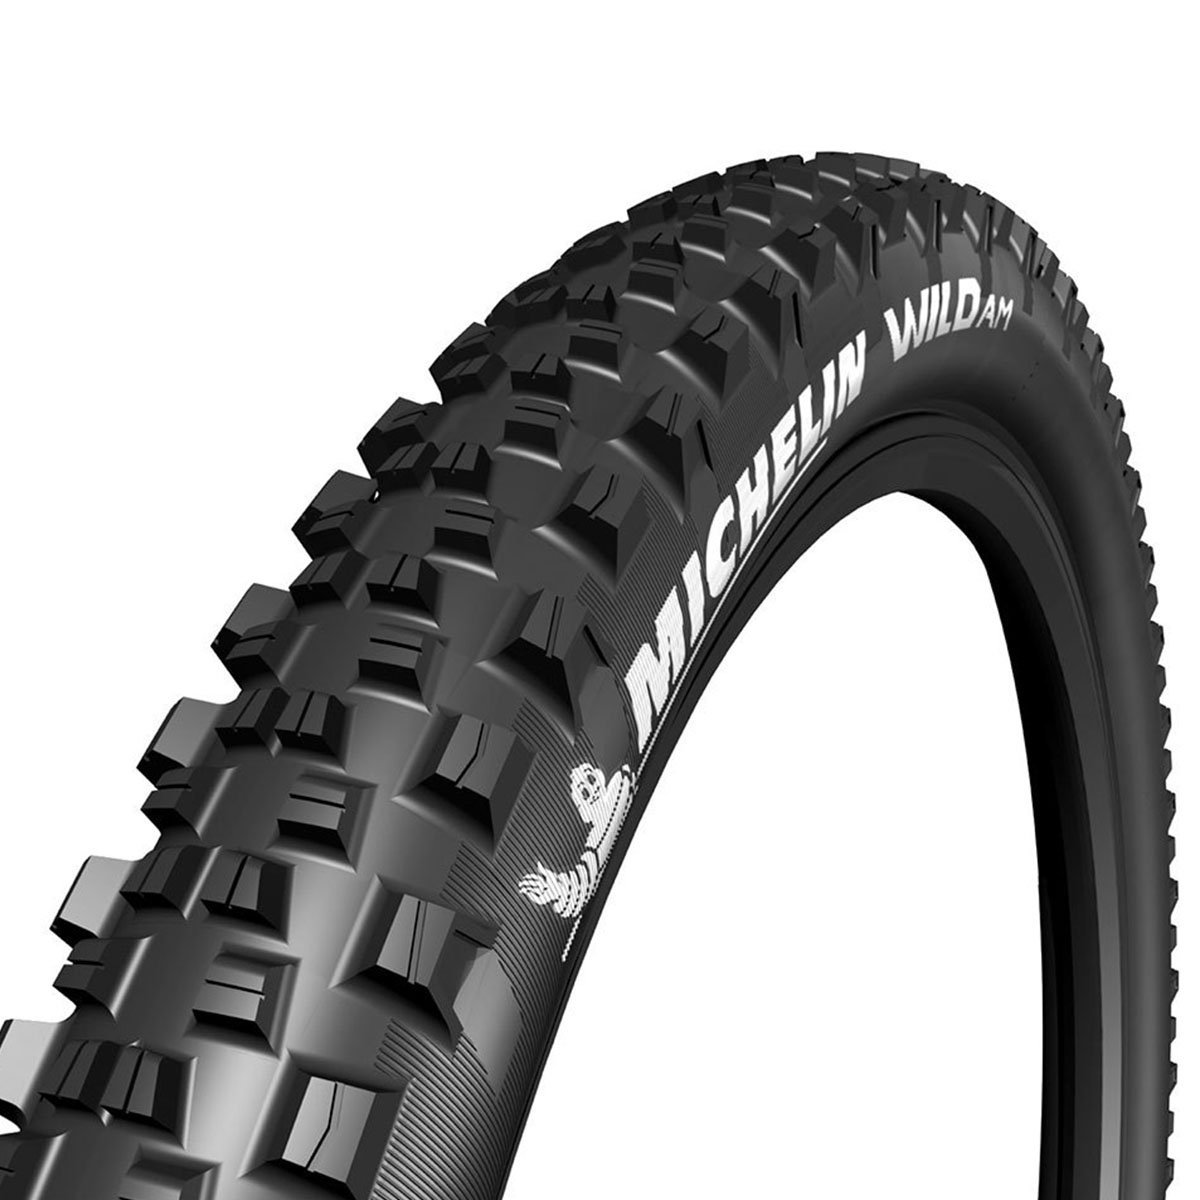 PNEU MICHELIN 29X2.35 WILD AM COMPETITION 3X60TPI KEVLAR TLR WILD AM COMPETITION LINE - 1